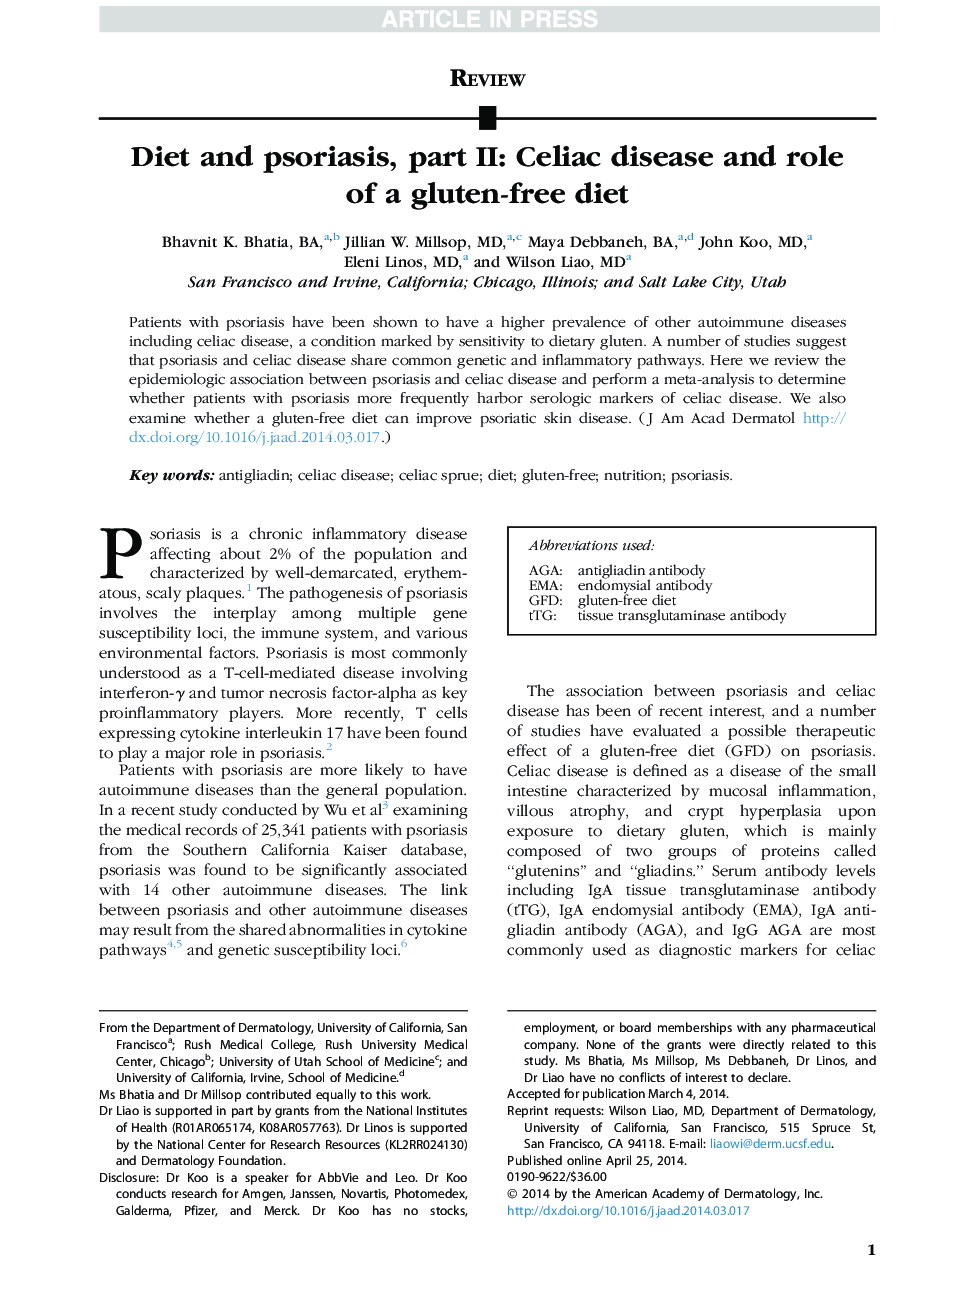 Diet and psoriasis, part II: Celiac disease and role of a gluten-free diet